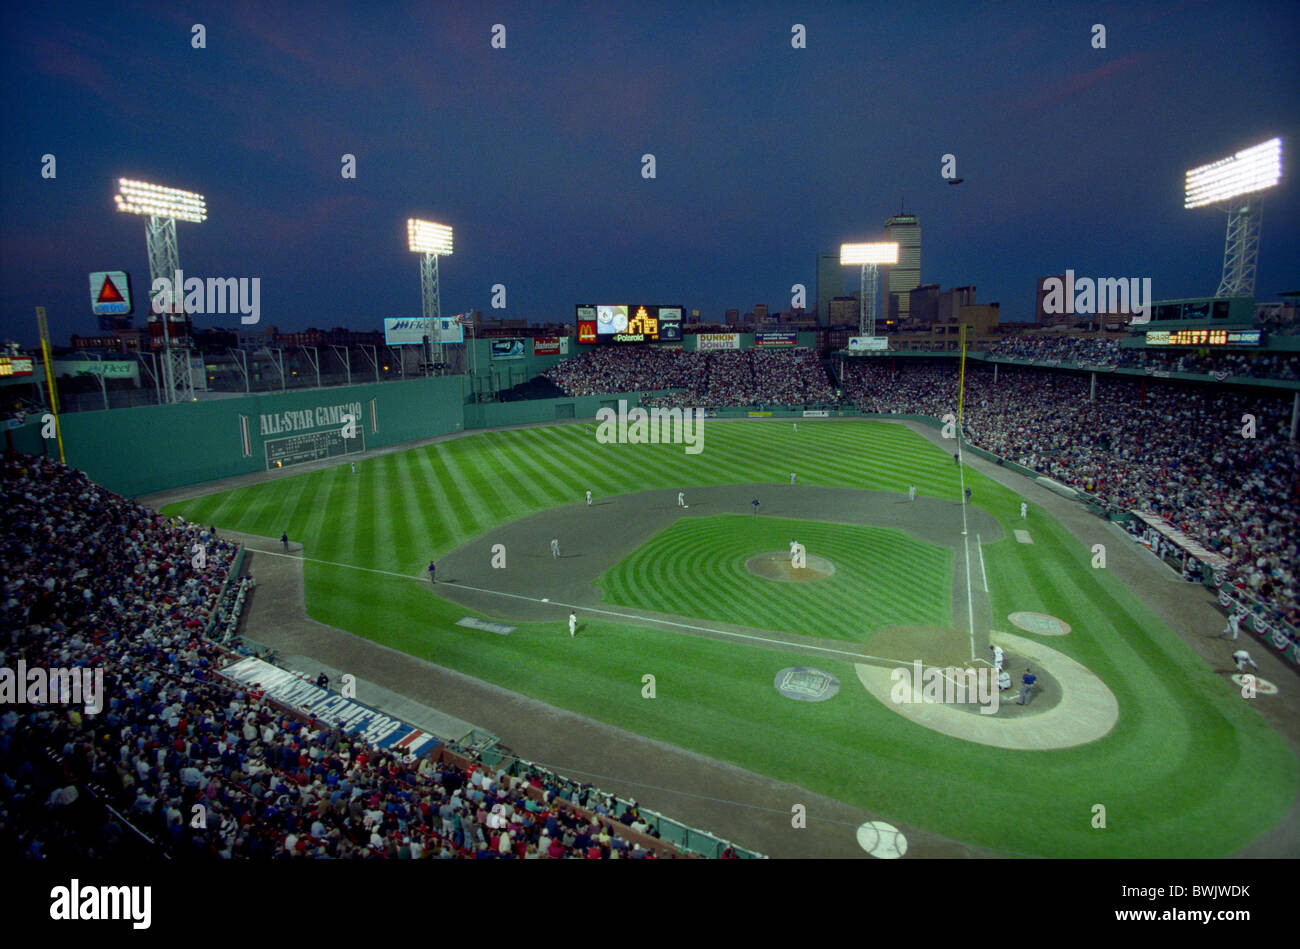 1999 MLB All Star Game Fenway Park Boston Red Sox Full Size